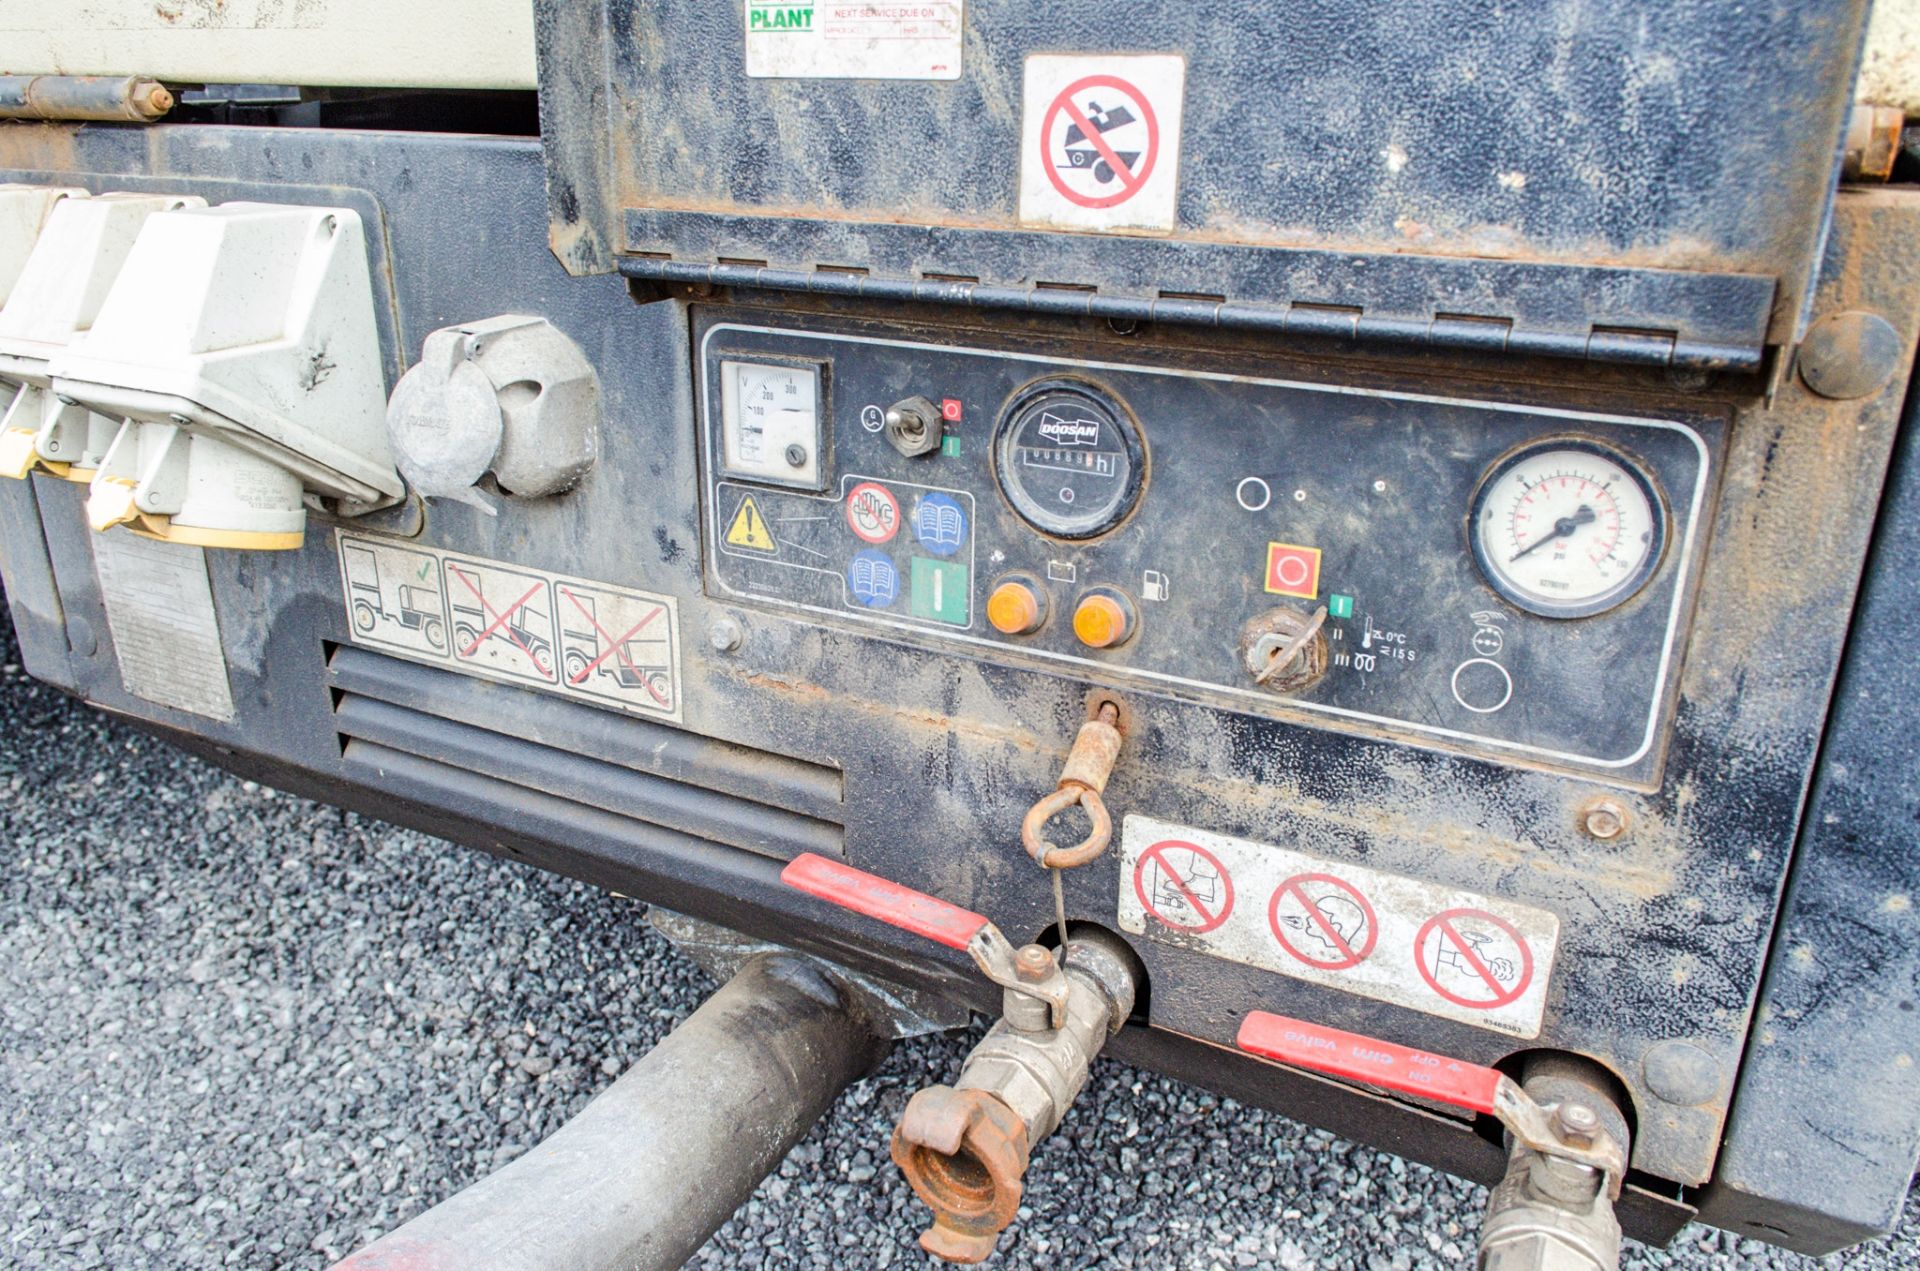 Doosan 741E diesel driven mobile air compressor/generator Year: 2015 S/N: 433552 Recorded Hours: 889 - Image 4 of 4